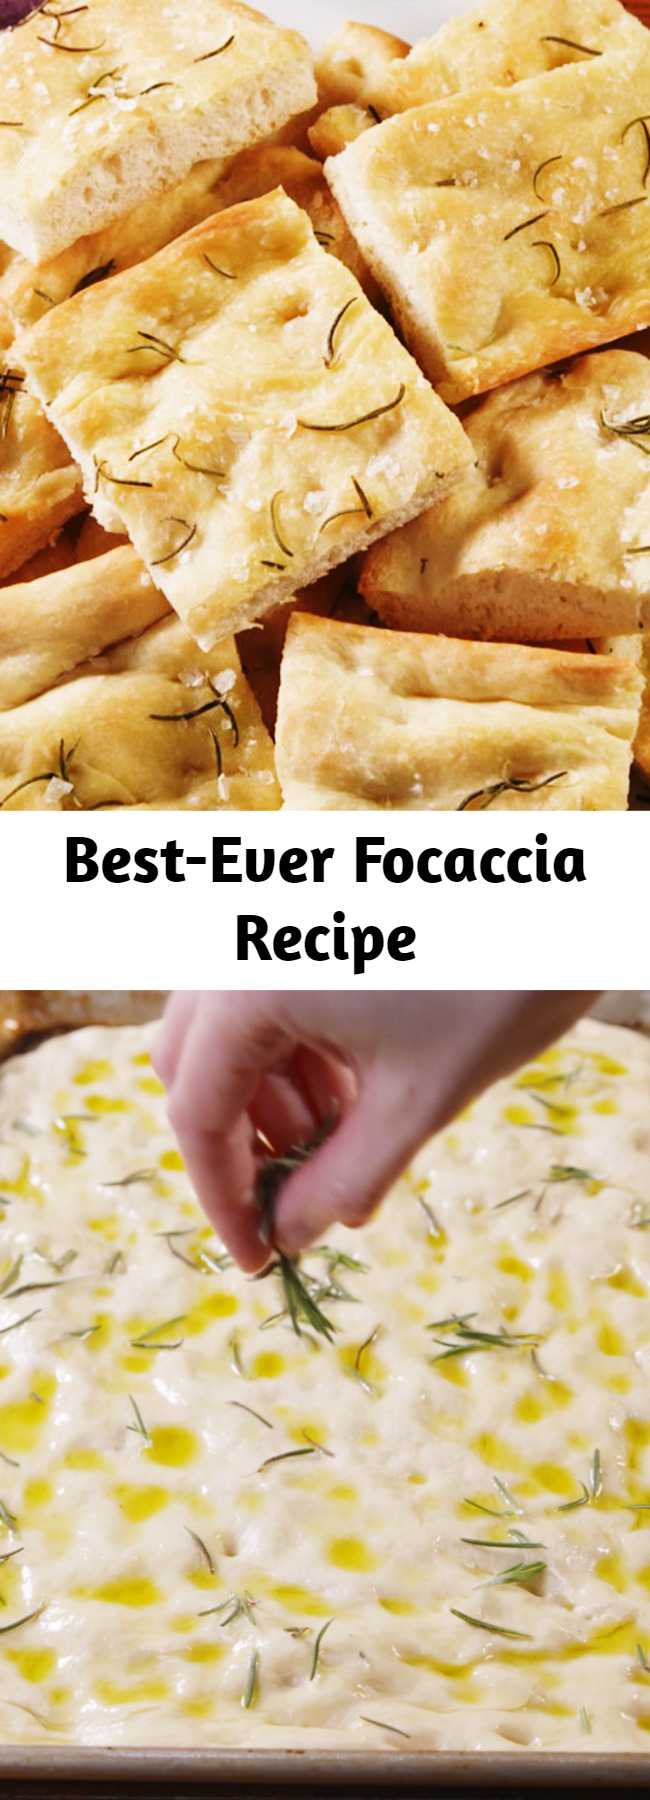 Best-Ever Focaccia Recipe - Is there anything more delicious or addicting than warm, freshly baked focaccia? If you answered no, you came to the right place. Our version is totally classic, topped with fresh rosemary leaves and crunchy sea salt. It’s perfectly crispy-toasty on the outside and super soft-fluffy inside. Learn how to conquer this Italian classic with a few easy-to-follow tips. #easy #recipe #bread #focaccia #rosemary #italian #skillet #oliveoil #howto